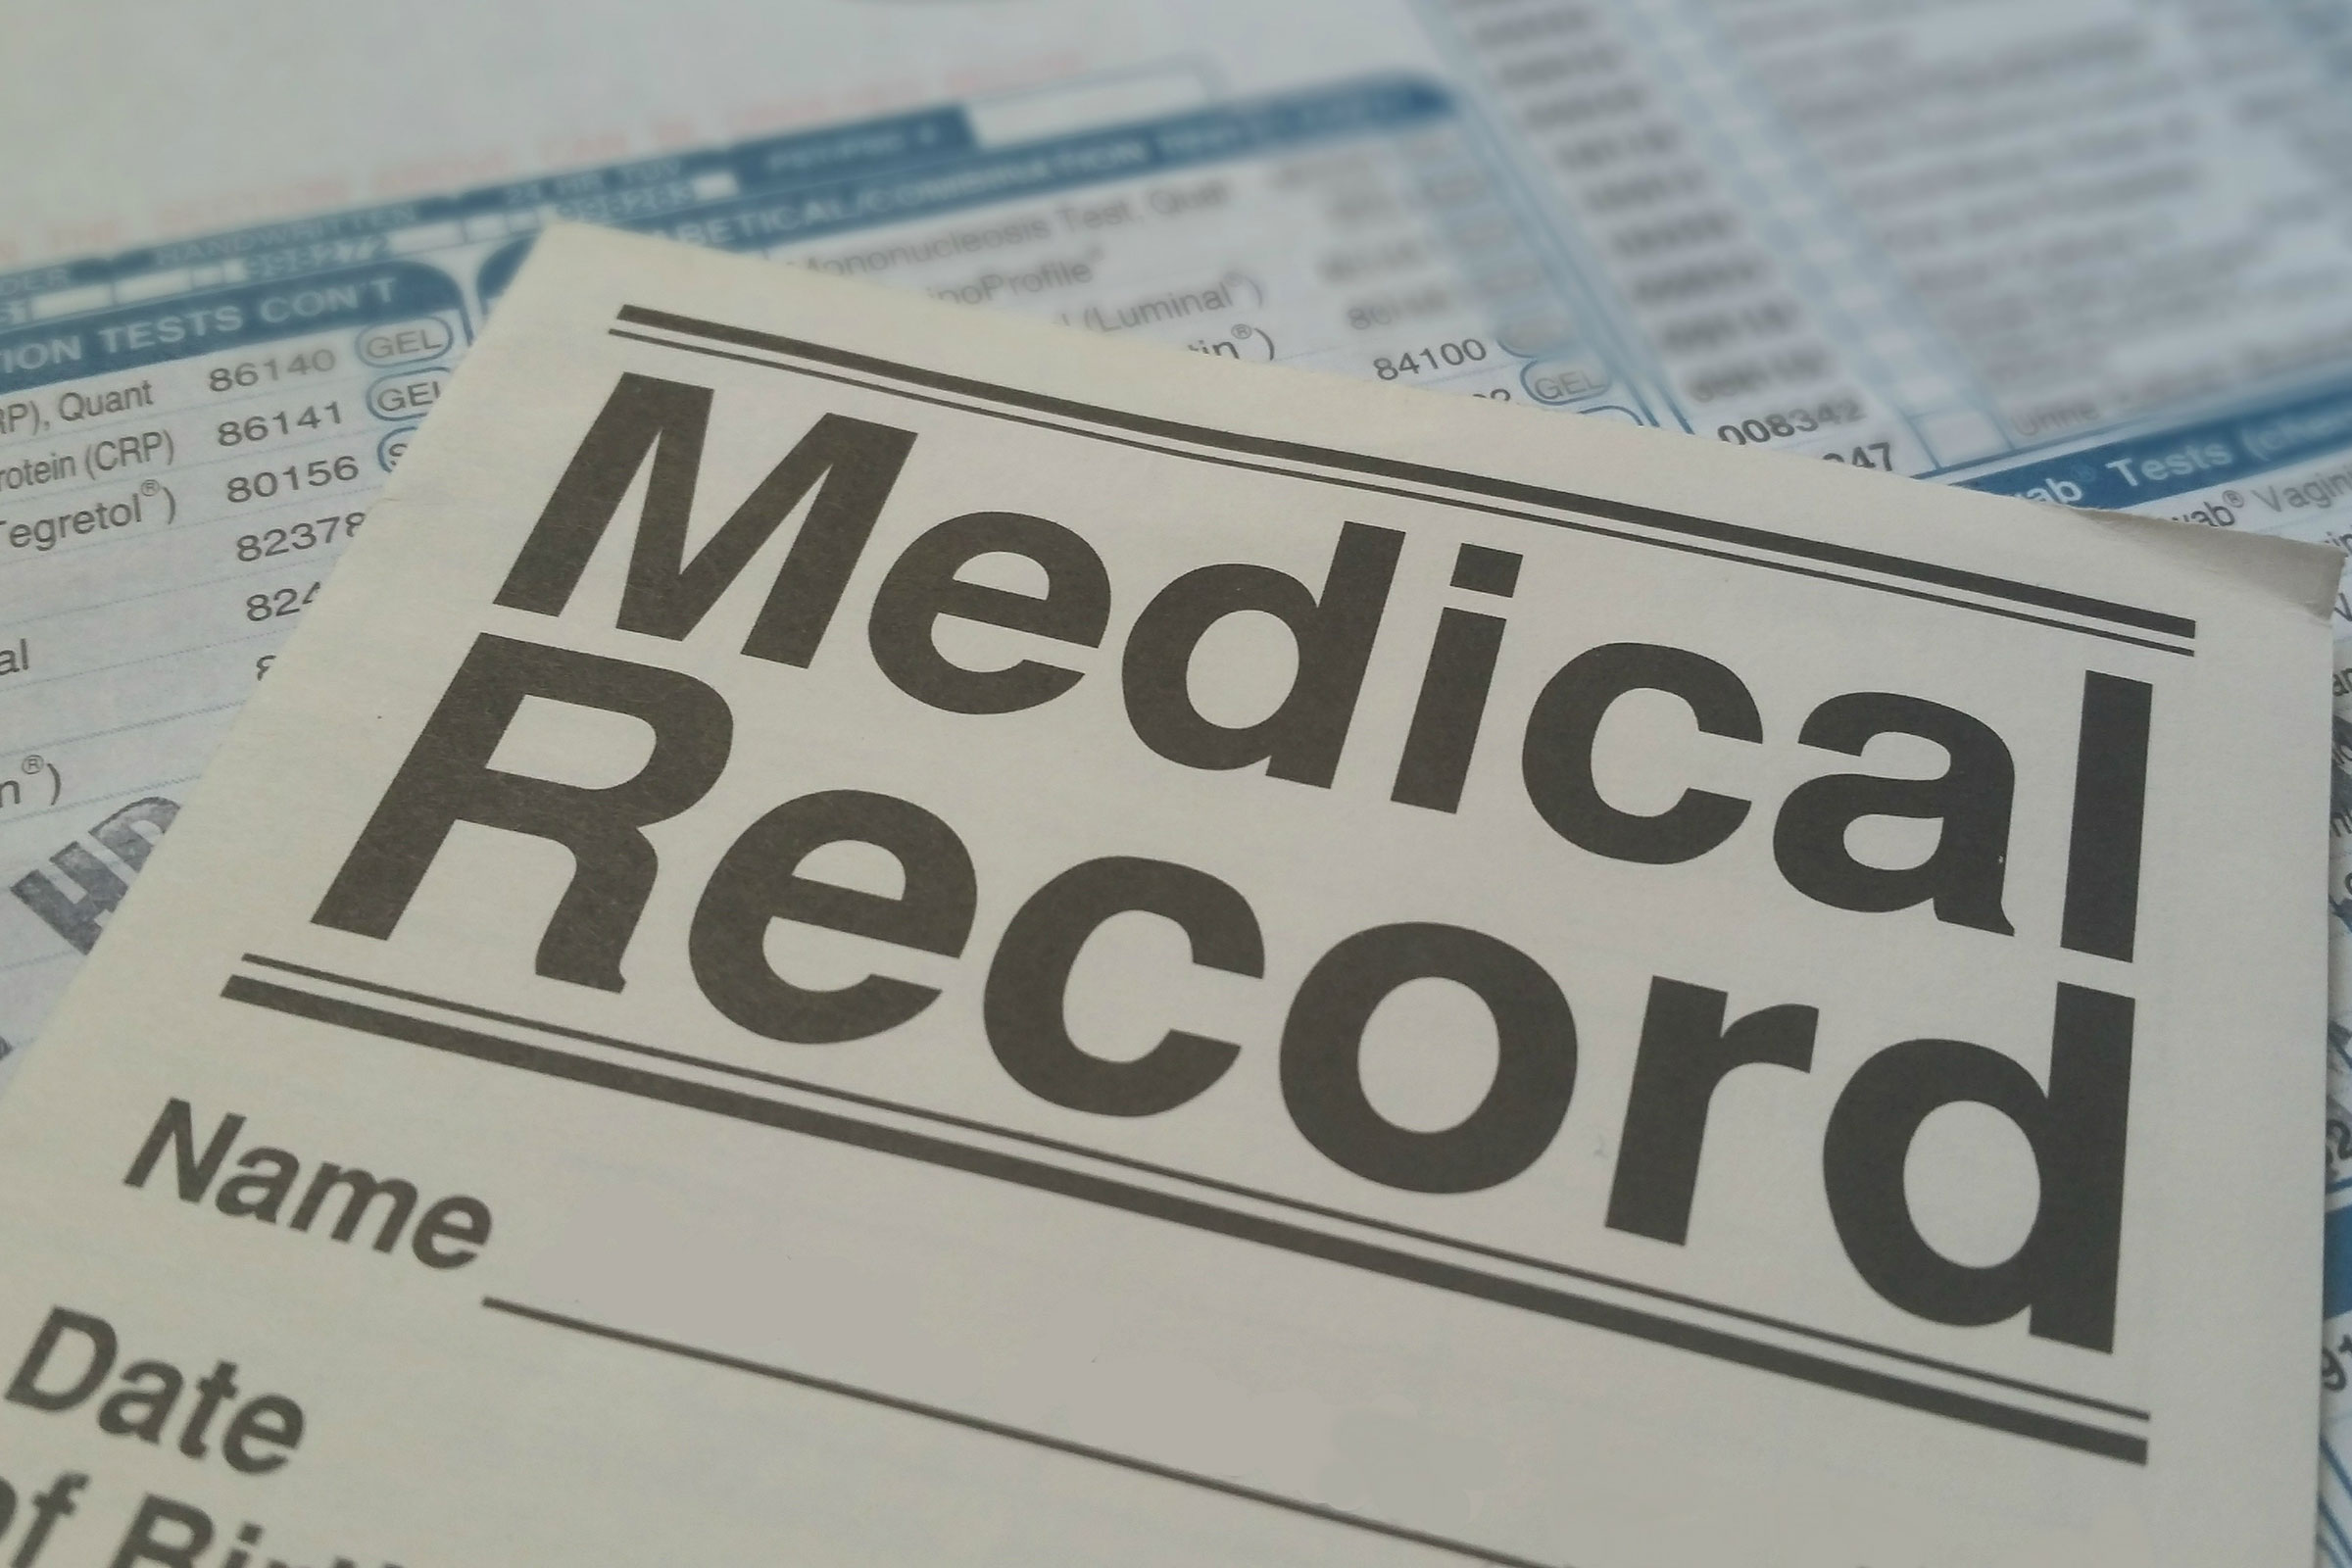 Electronic Medical Records: The Components of a Medical Record